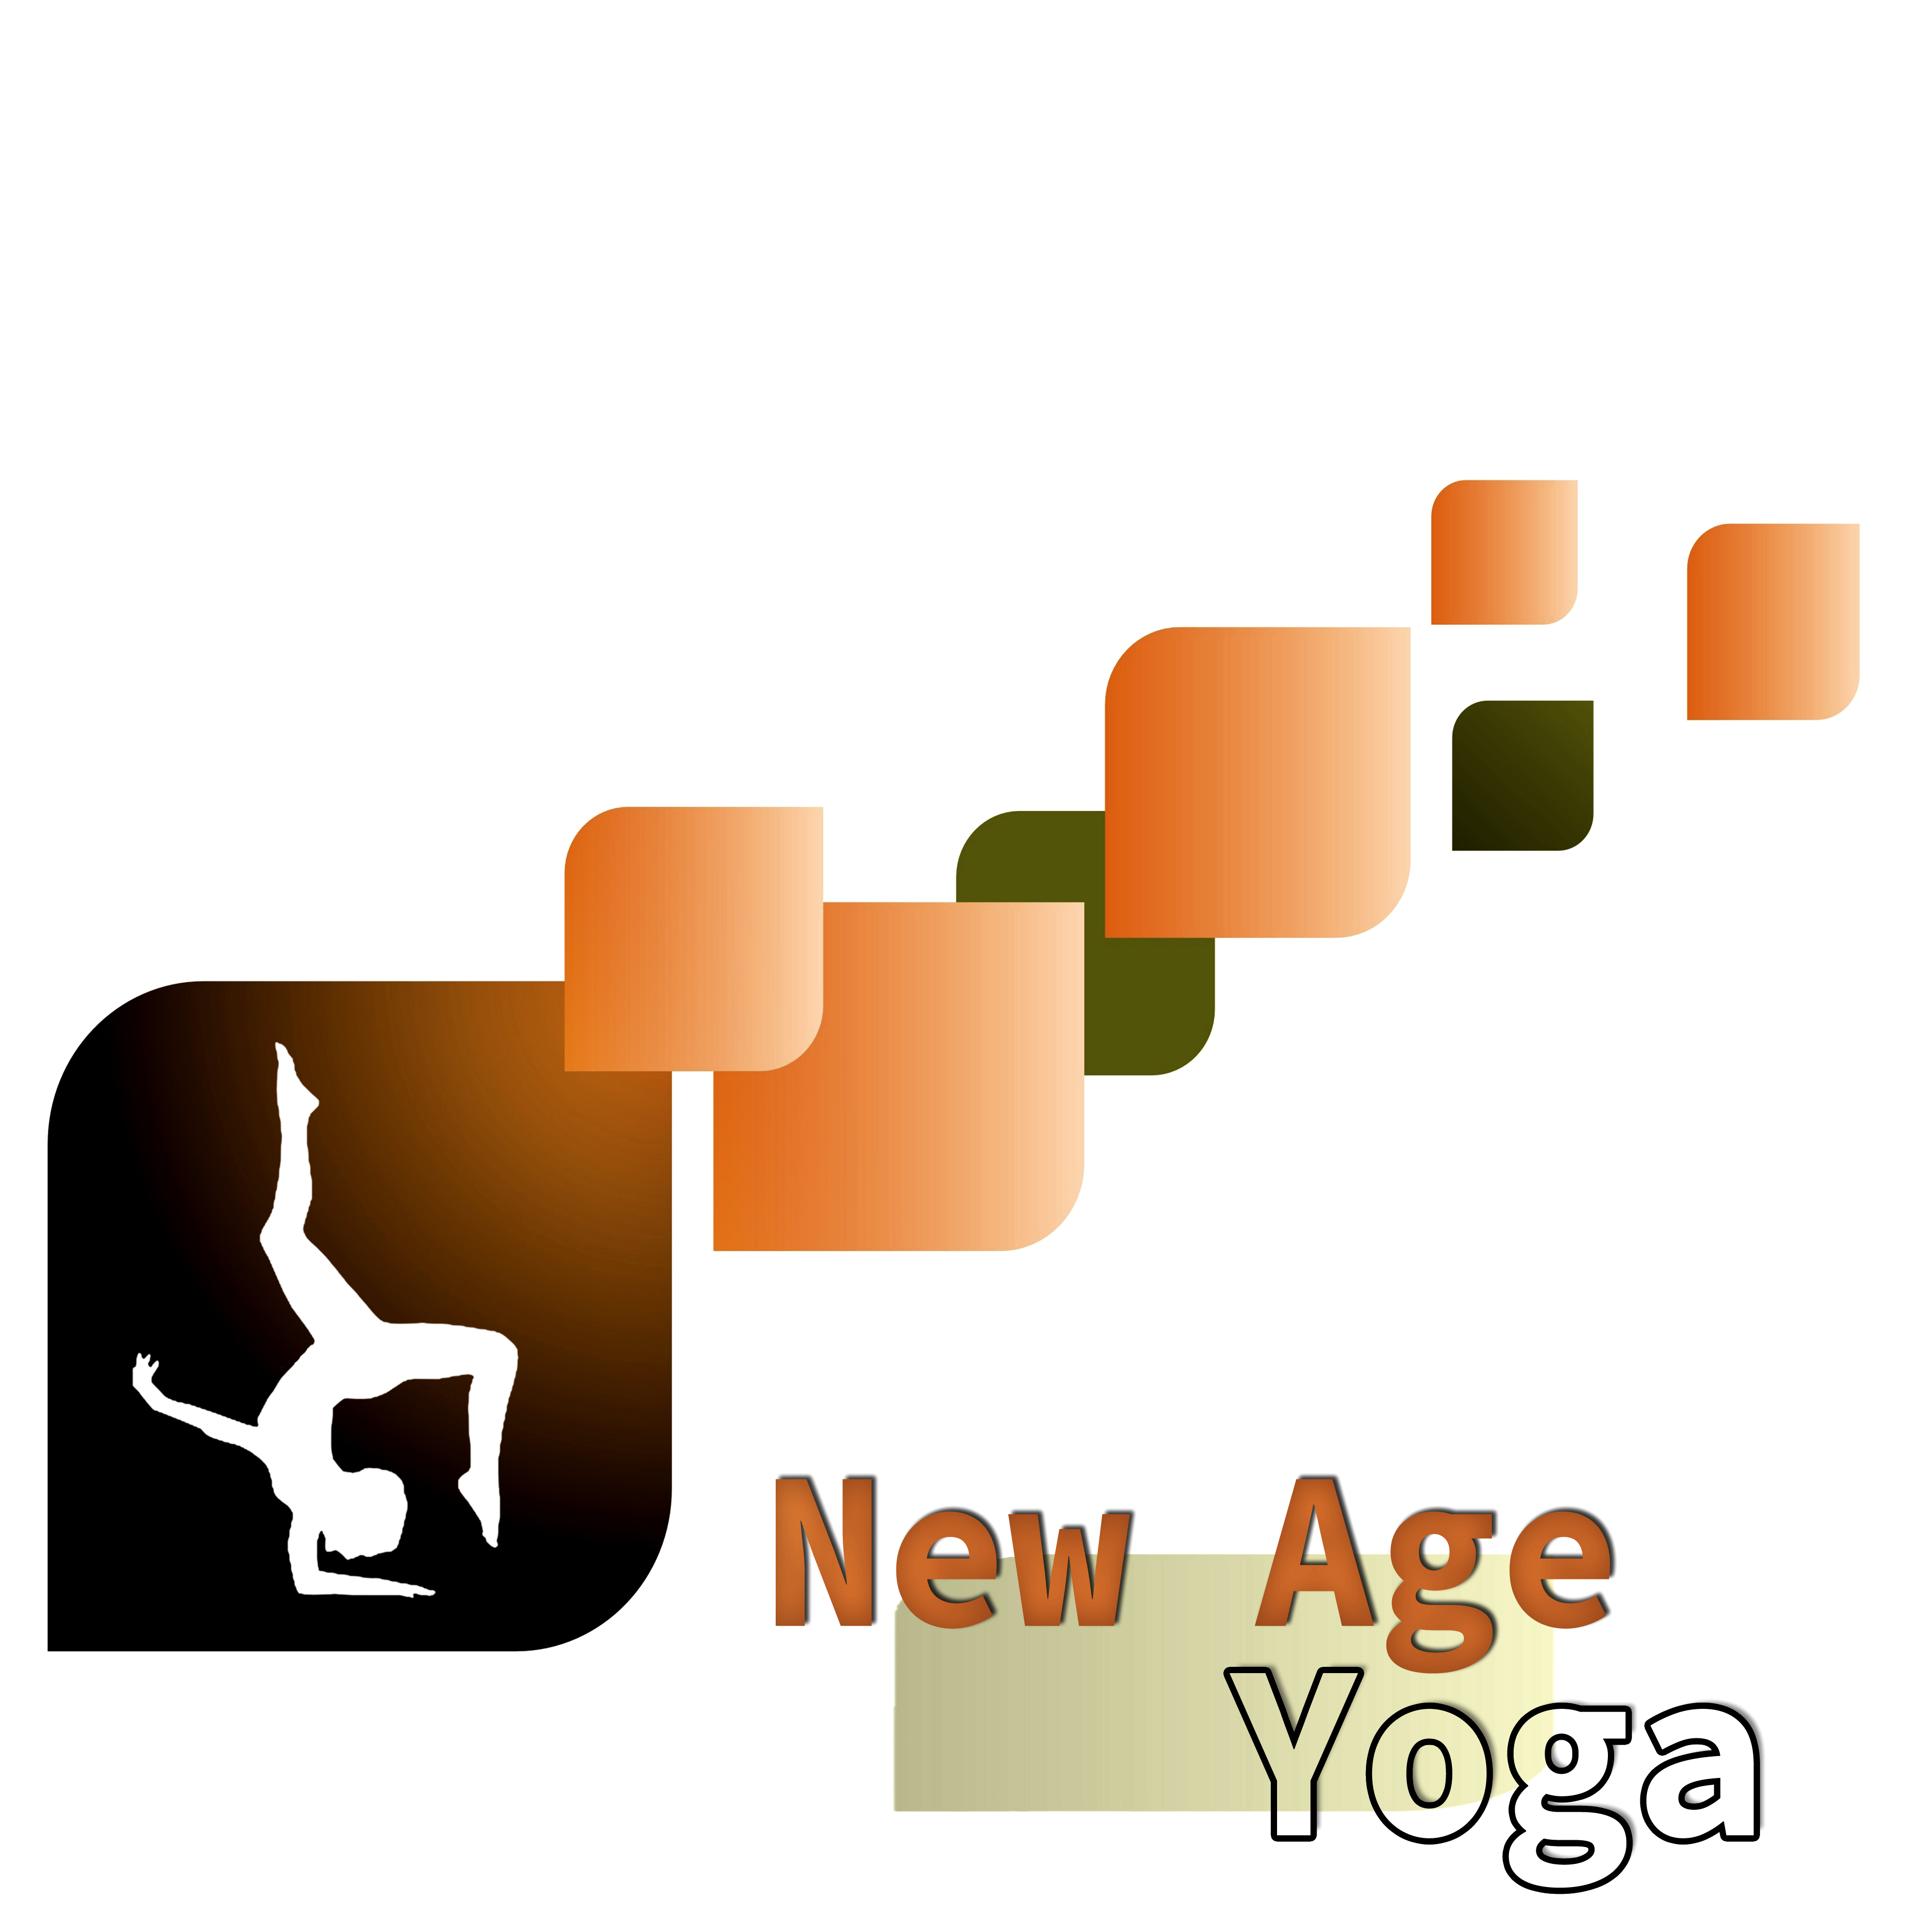 New Age Yoga - Early Morning, Calming Music, Body Energy, Serenity Music, Nature Sounds